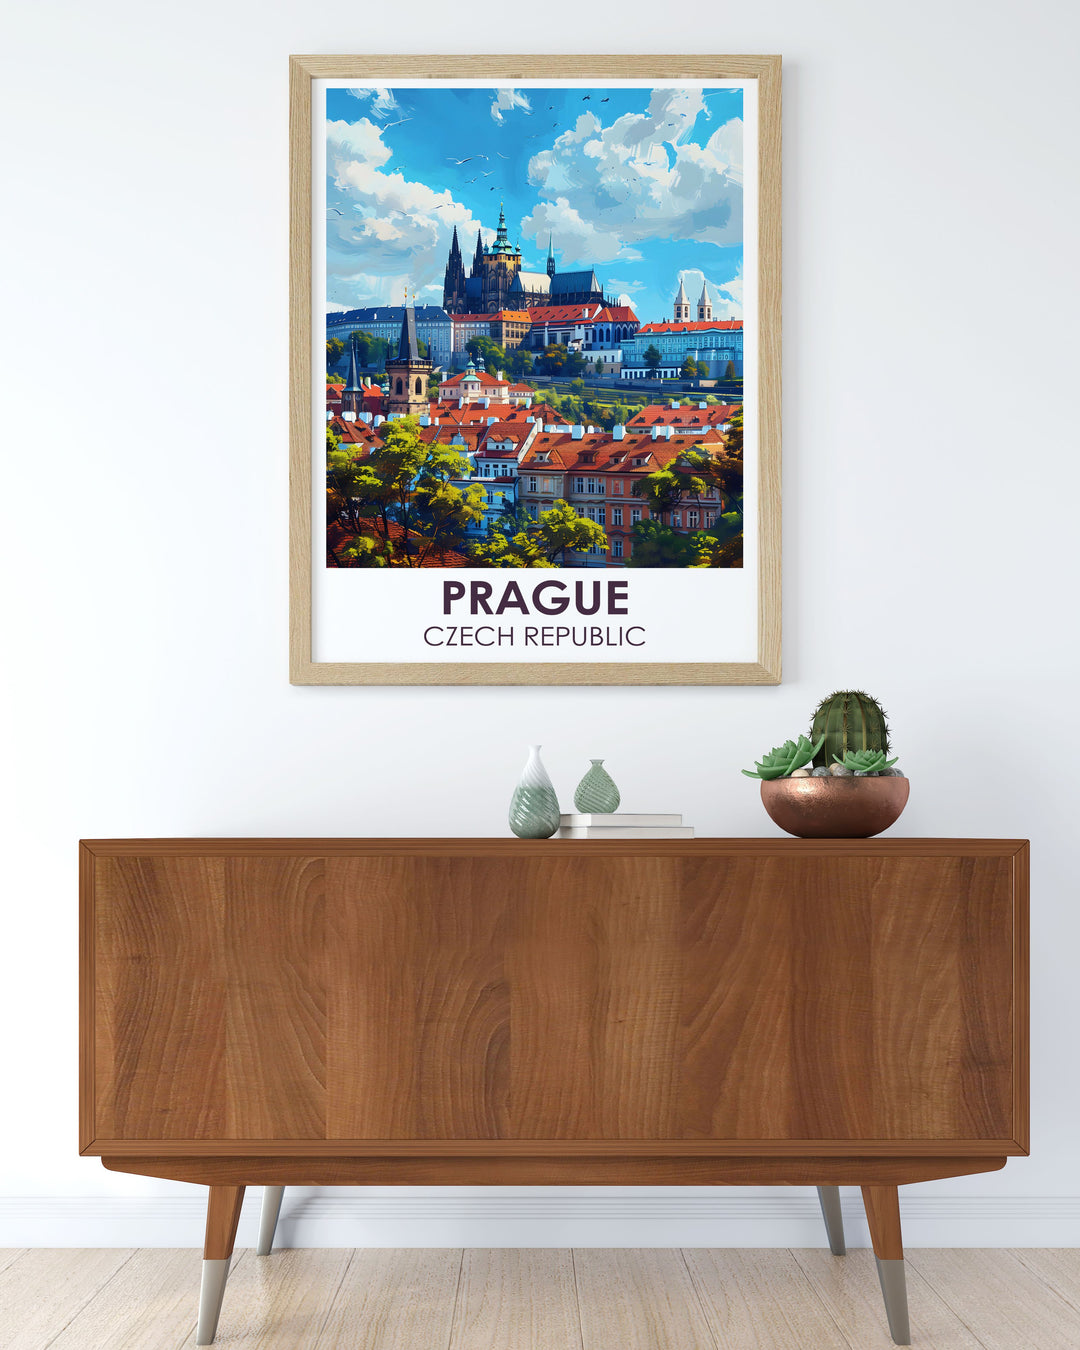 Add a touch of sophistication to your home with a Prague Poster. This Czech Republic Print captures the vibrant spirit of Prague, making it a perfect addition to any Prague Home Decor collection. Great for travel and art enthusiasts.